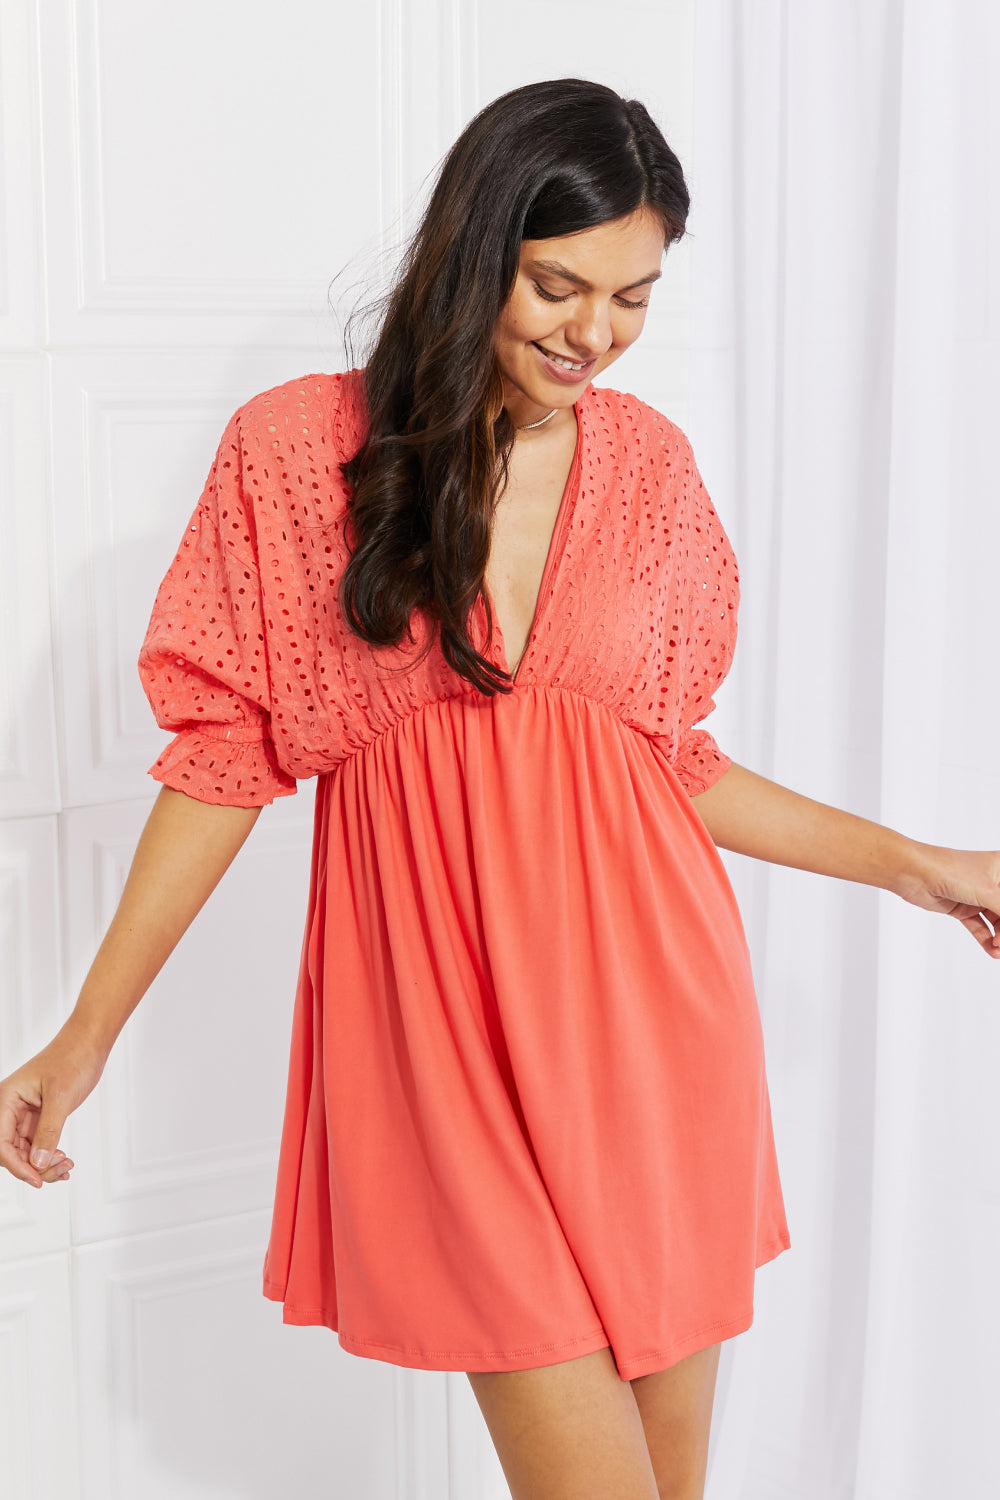 Our Everyday Dreams Eyelet Contrast Dress is straight out of dreamland. The contrasting textures on the bodice and skirt create a casual but cute look that is perfect for wearing all season long, and the open back shows off a bit of skin for a summery touch. S -XL